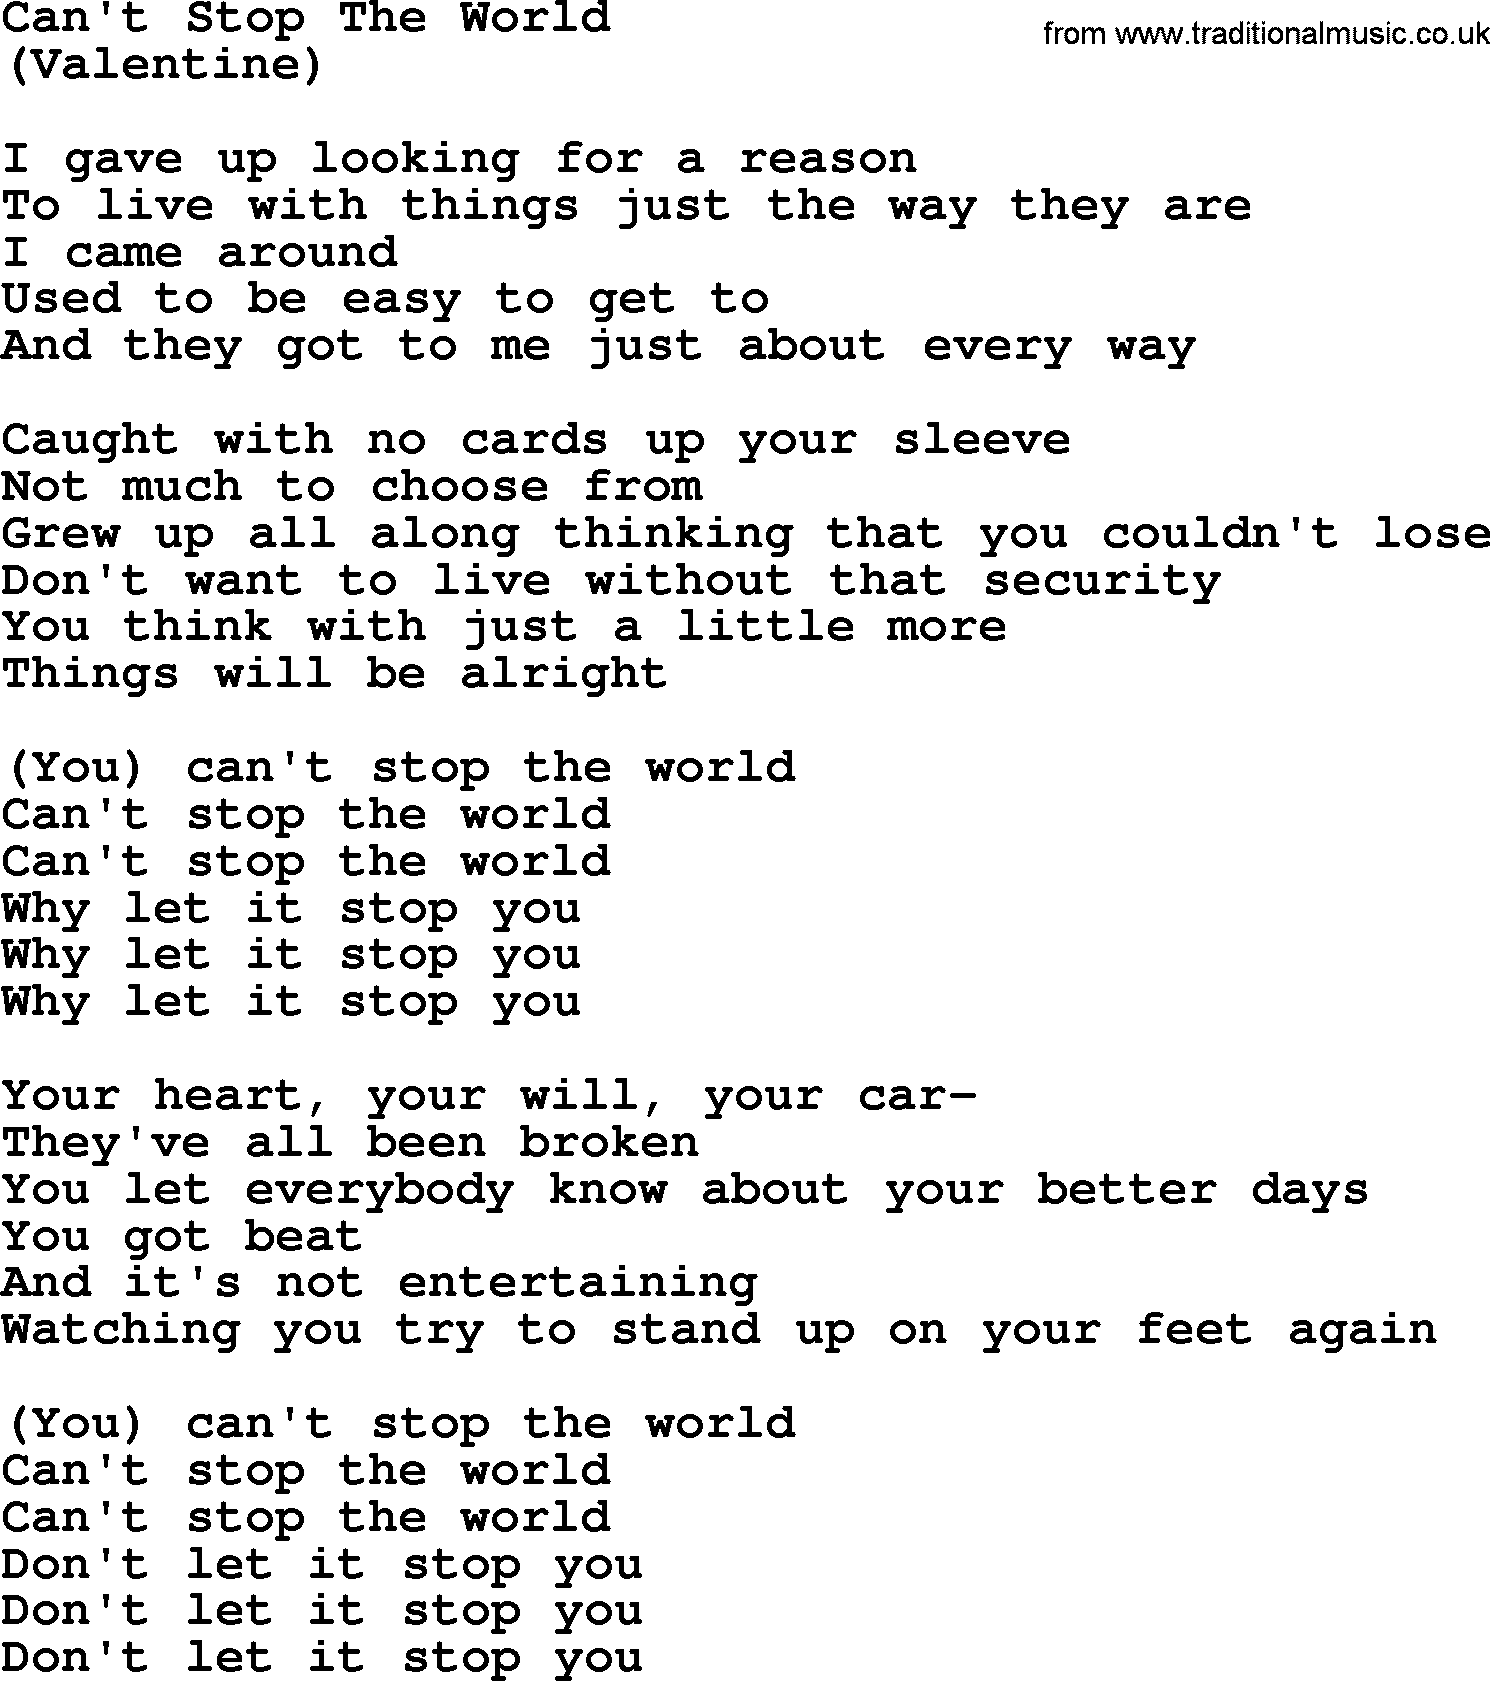 The Byrds song Can't Stop The World, lyrics